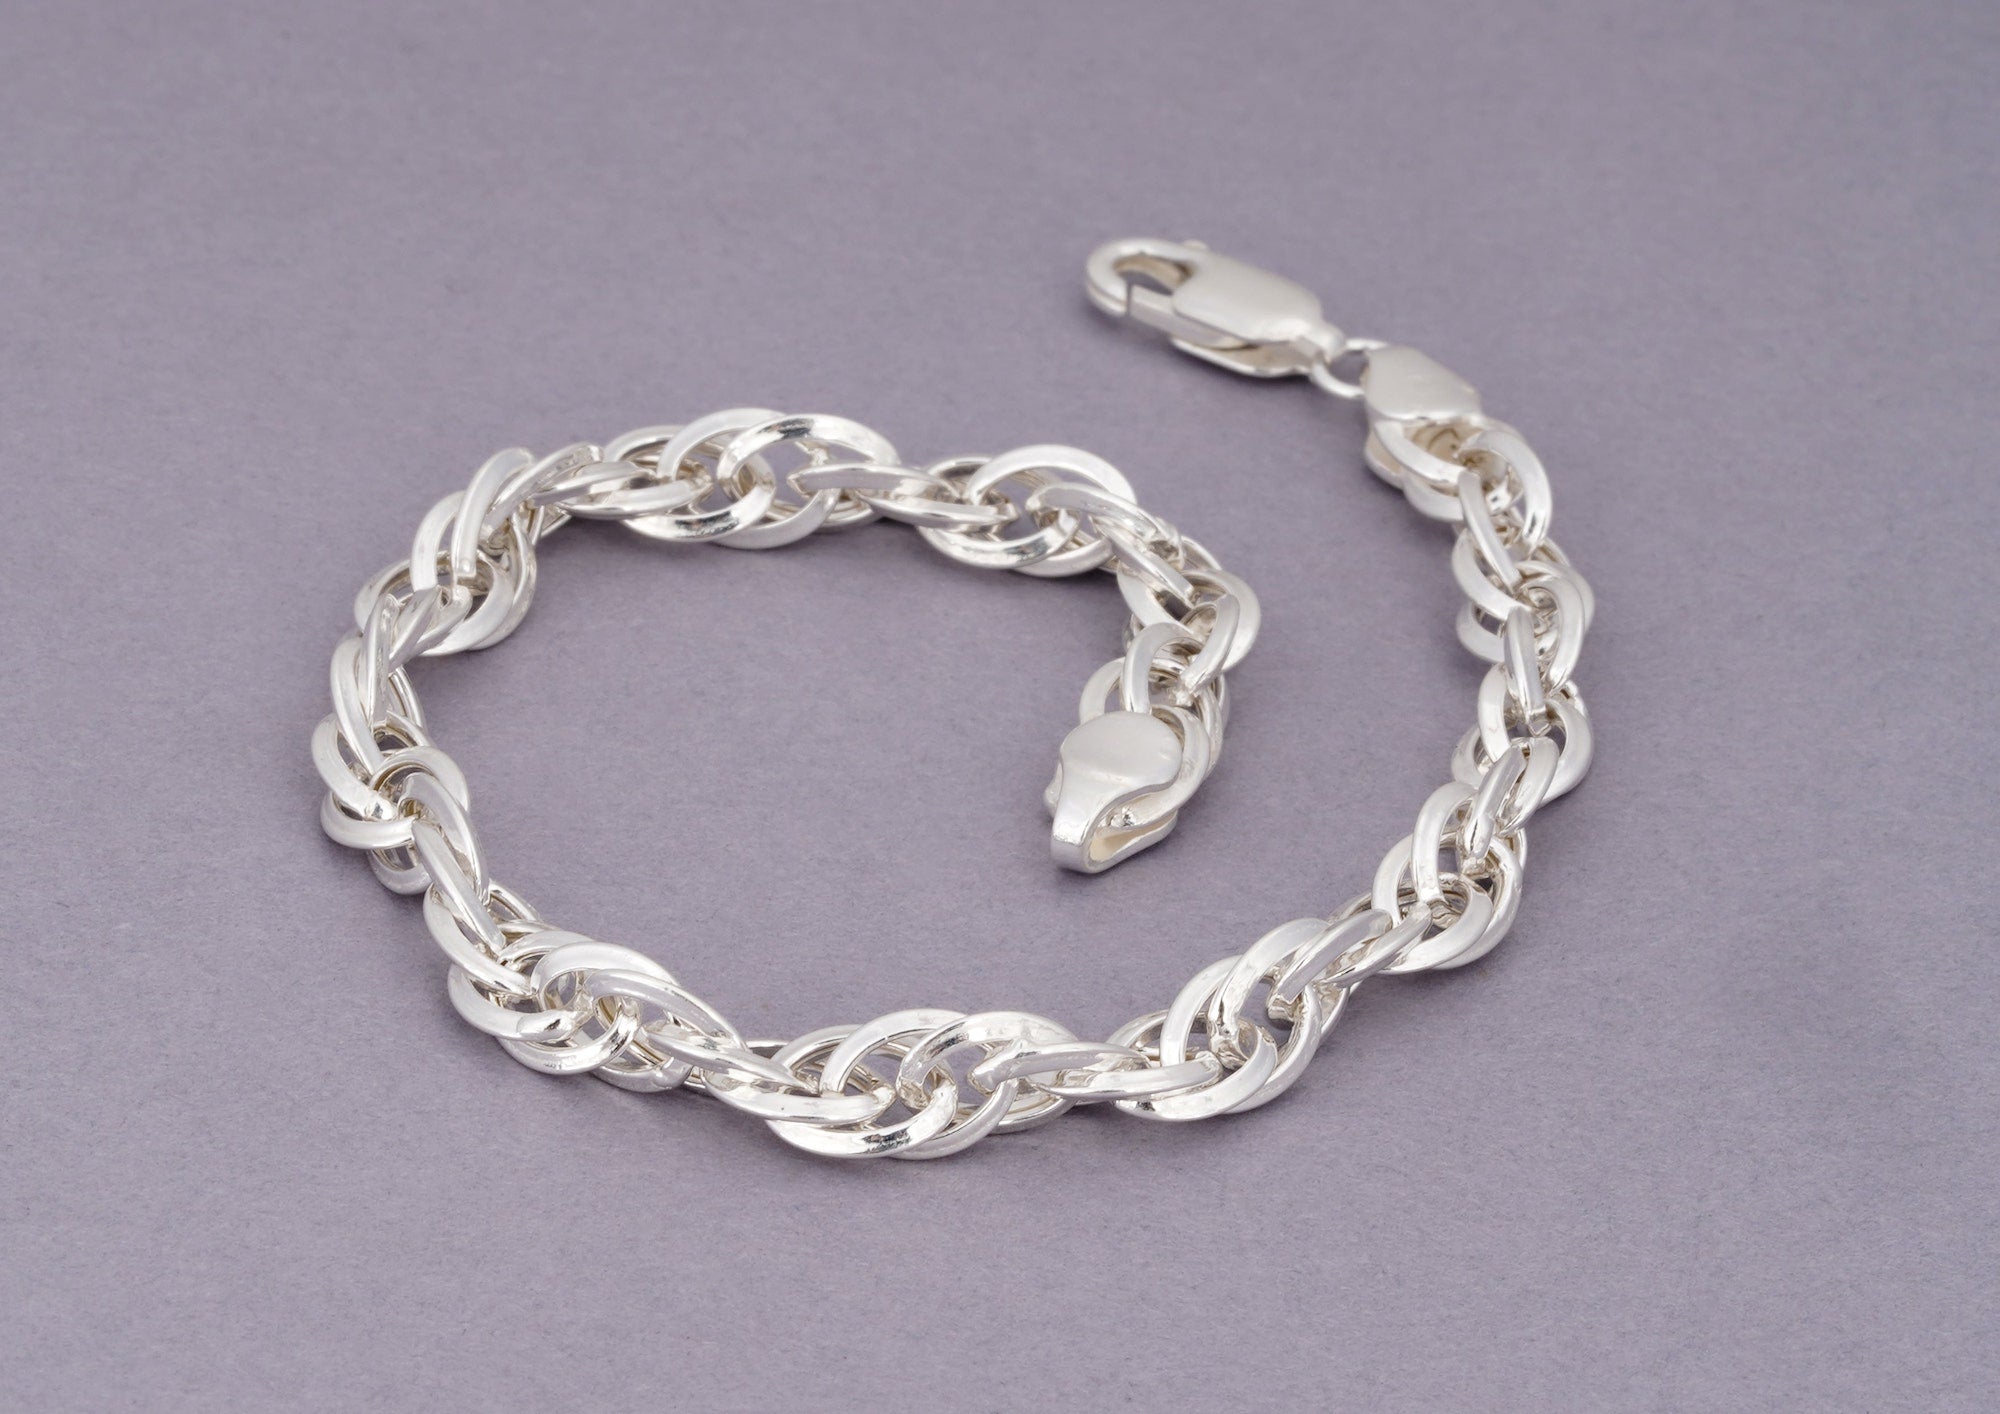 Buy The Latest Collection Of Silver Bracelets For Men At Orionz Jewels –  ORIONZ